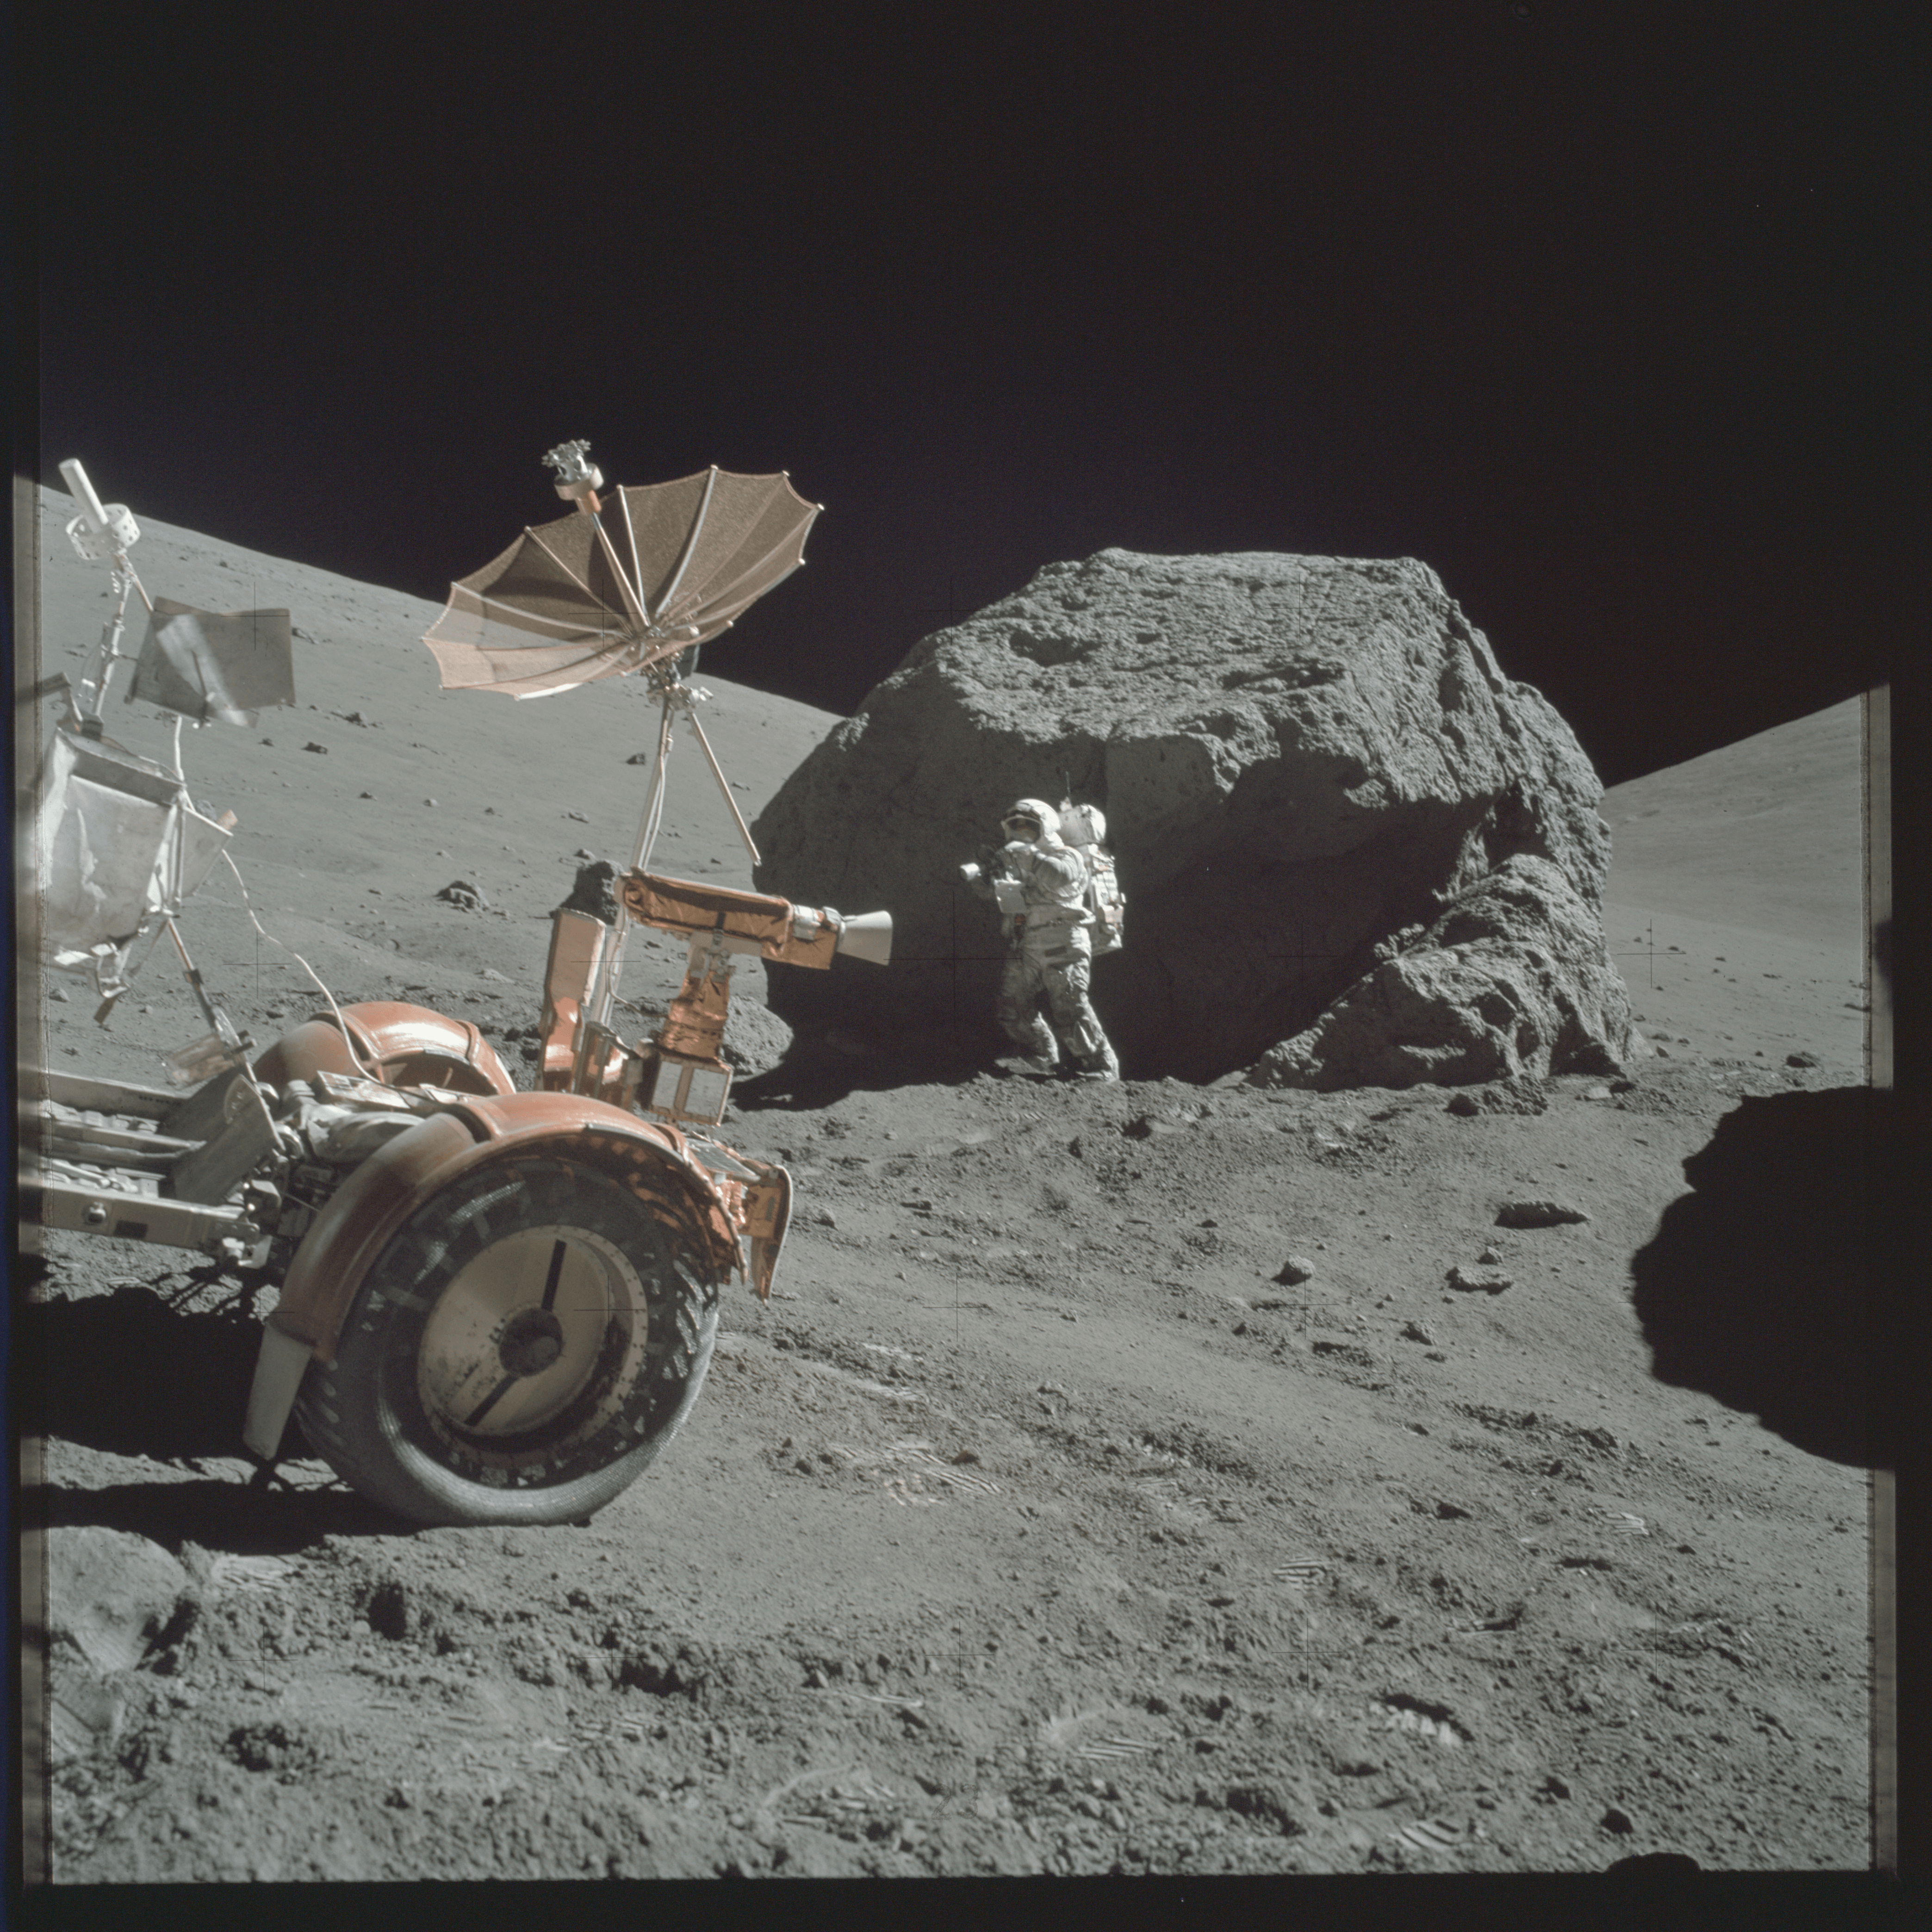 Over 400 image from NASA's Moon missions are now on Flickr